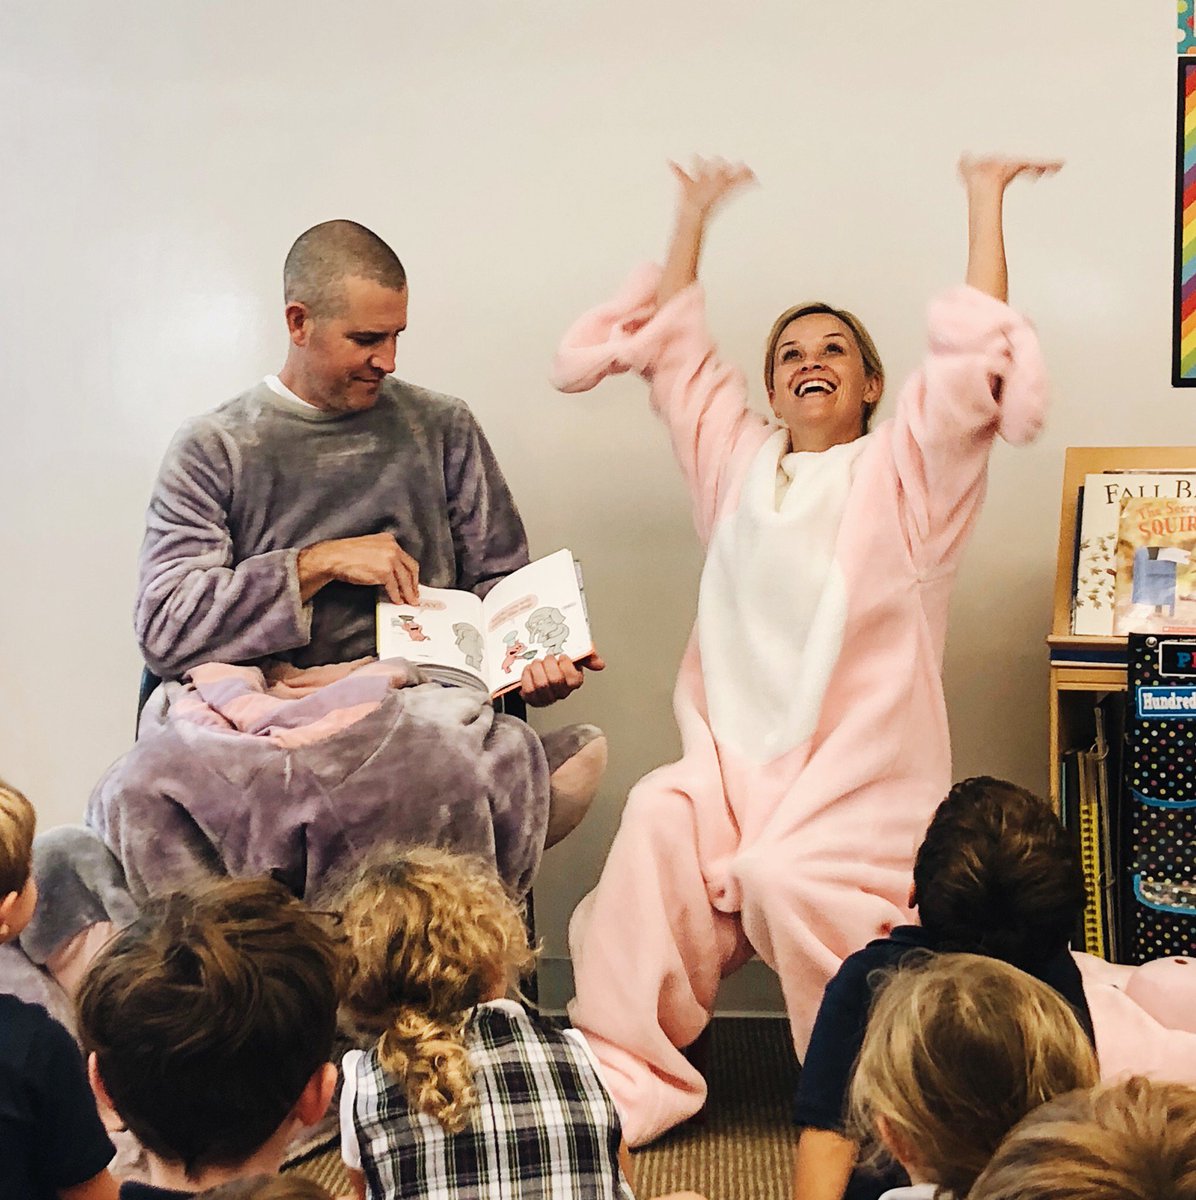 You gotta commit. Hubby & I took Mystery Reader to new levels! Thank you @The_Pigeon for the inspiration. #ElephantAndPiggie #KindergartenLife 🐘🐷